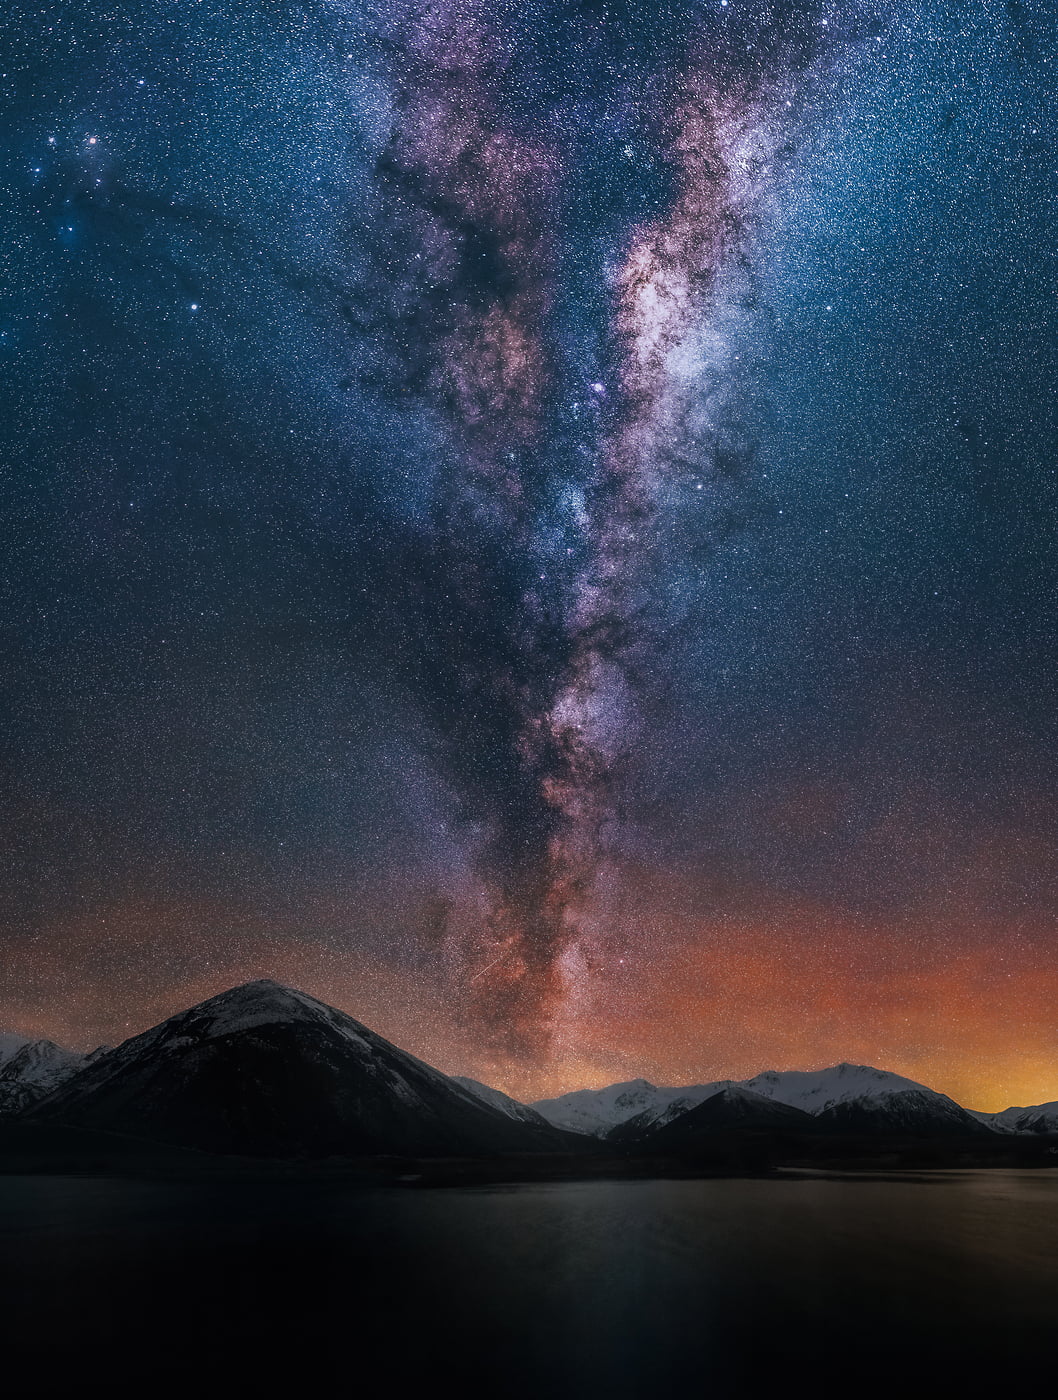 298 megapixels! A very high resolution, large-format VAST photo print of the night sky, milky way, and stars over mountains and a lake; fine art astrophotography landscape photo created by Paul Wilson in New Zealand